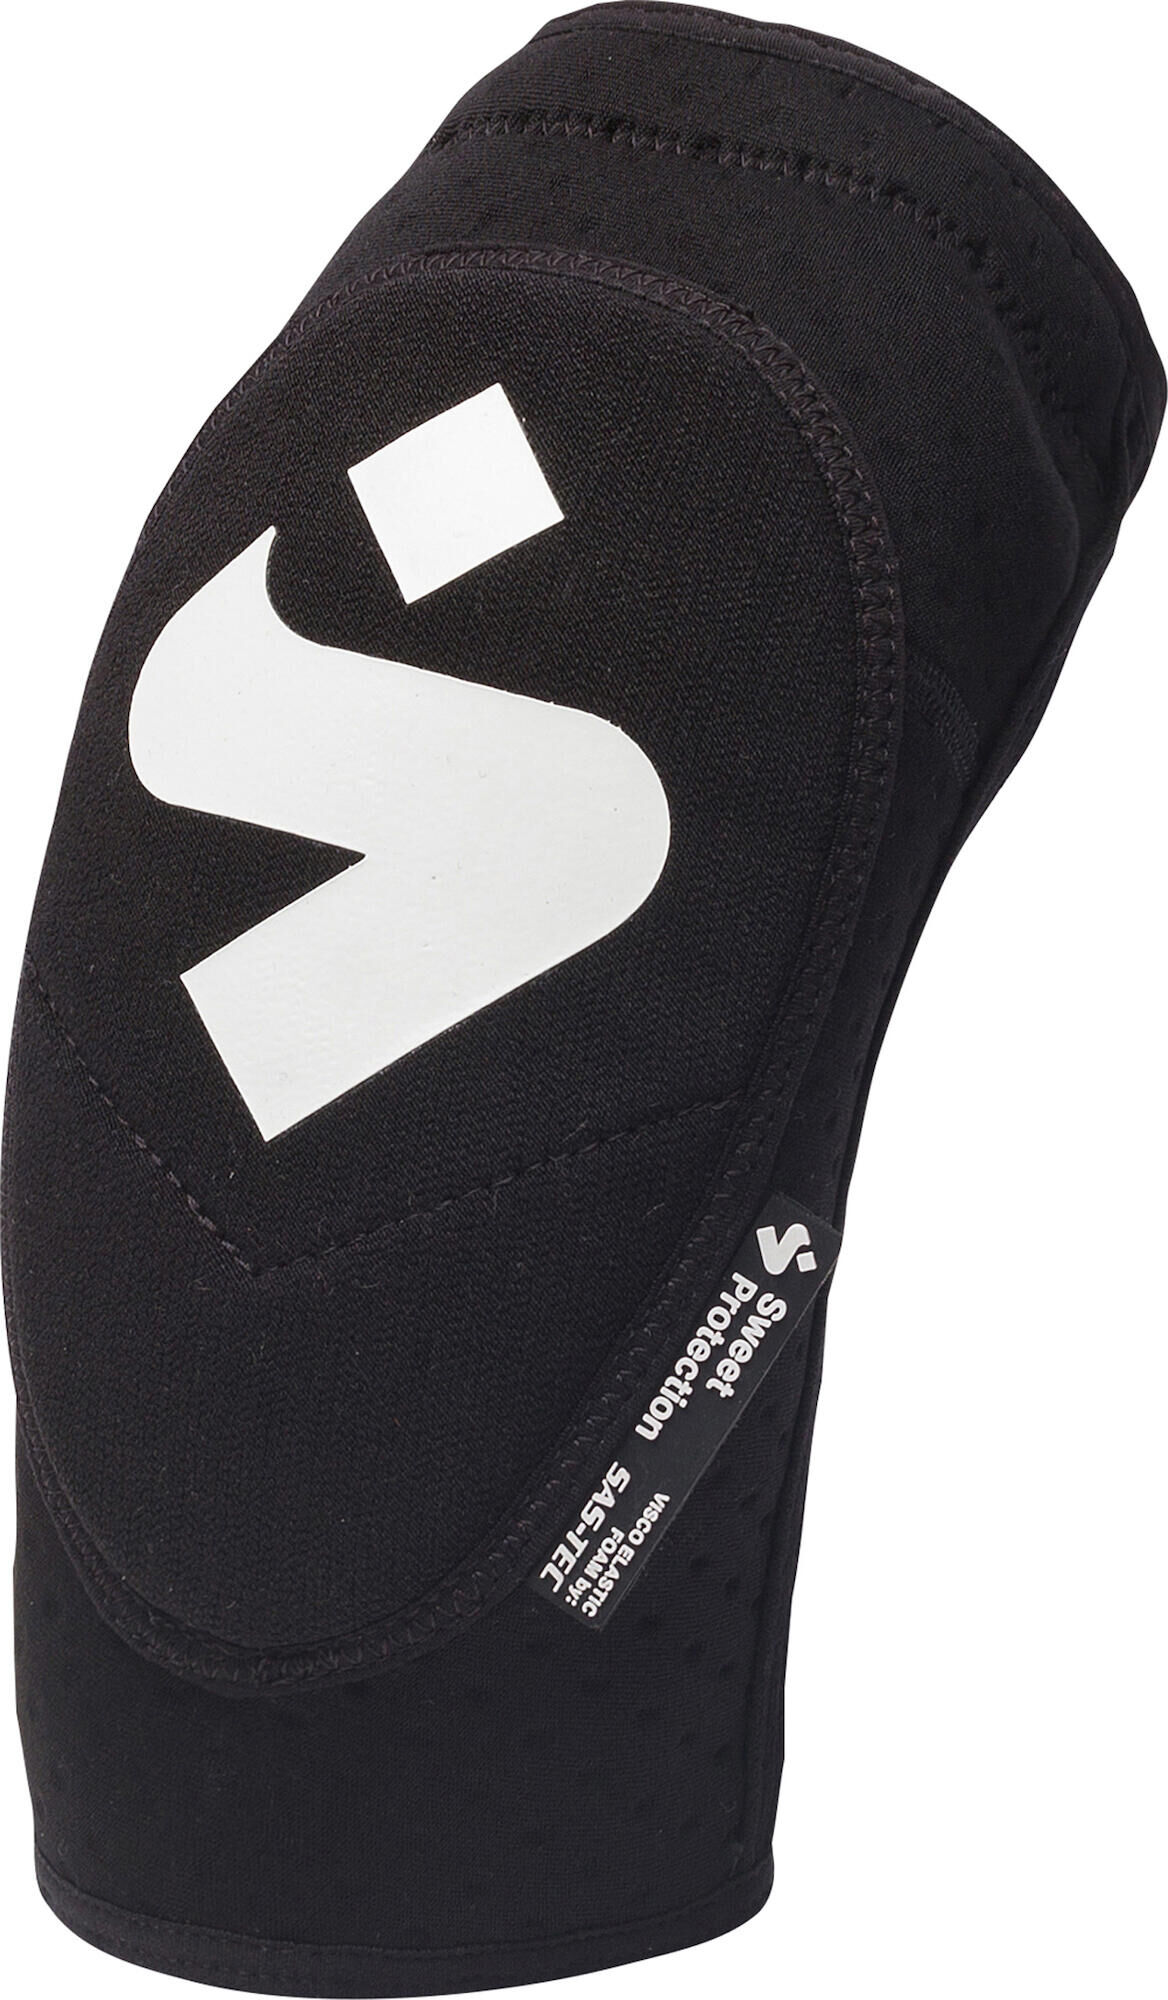 Sweet Protection Elbow Guards black (BLACK) M